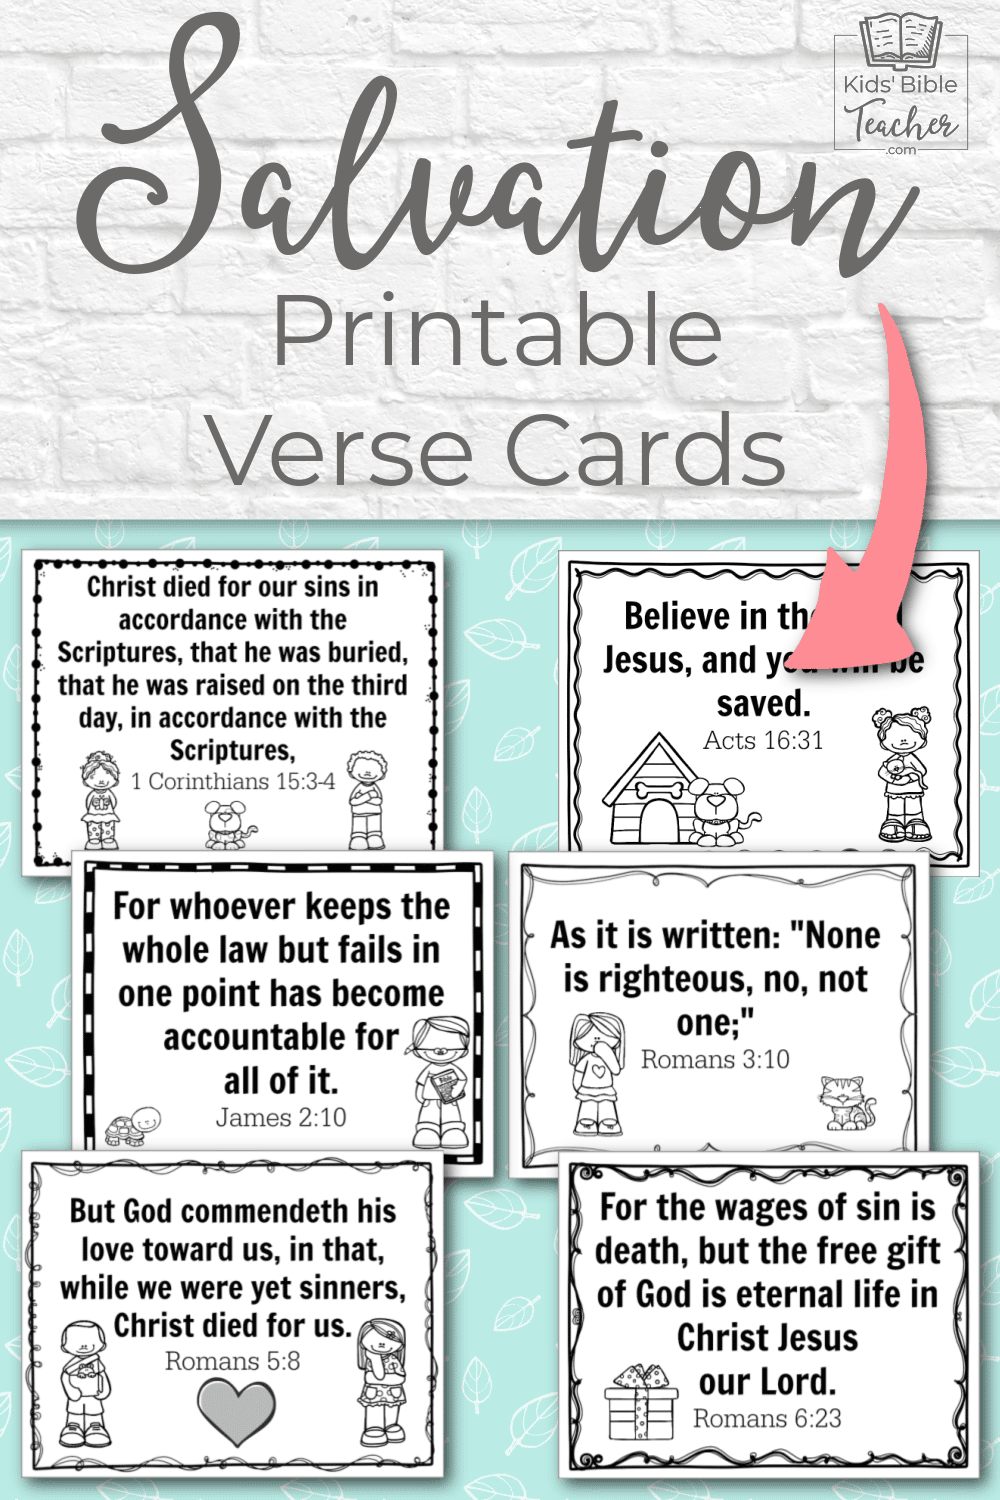 These free printable verse cards are a perfect way to share the Gospel with your kids, or to hand out to kids visiting your Sunday School or Awana.